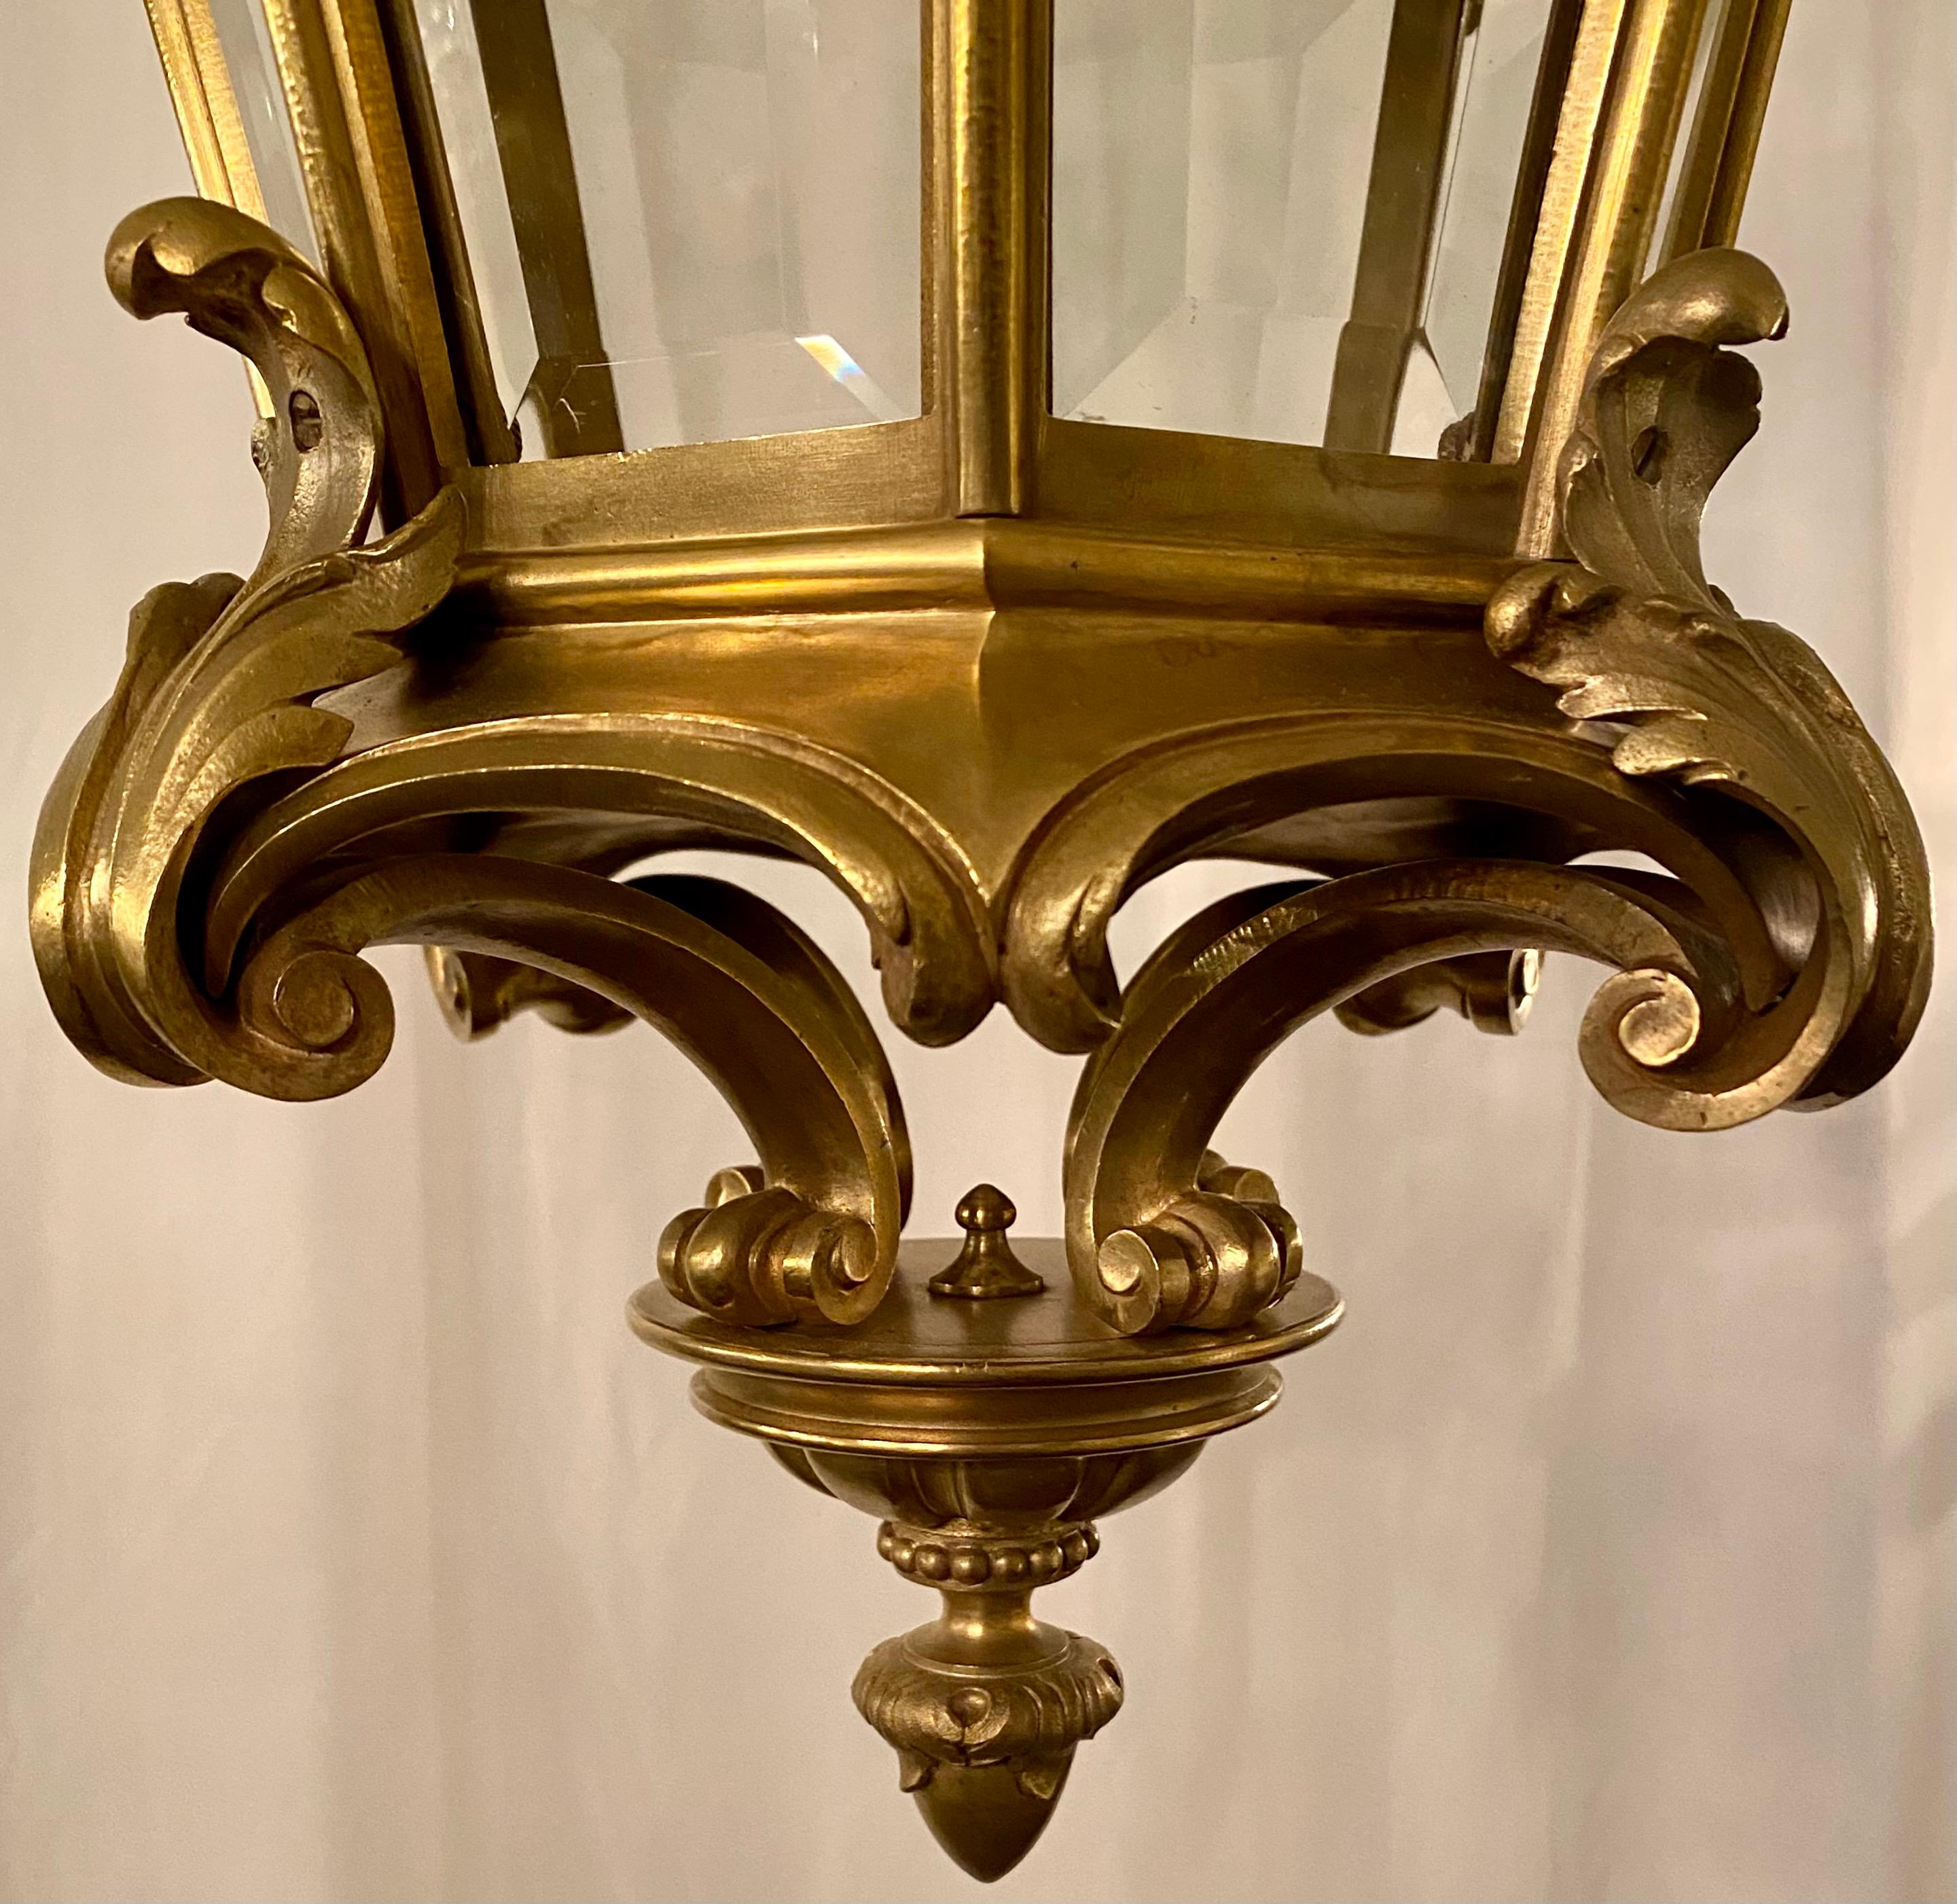 Antique 19th Century French Gold Bronze and Beveled Glass Chateau Lantern In Good Condition For Sale In New Orleans, LA